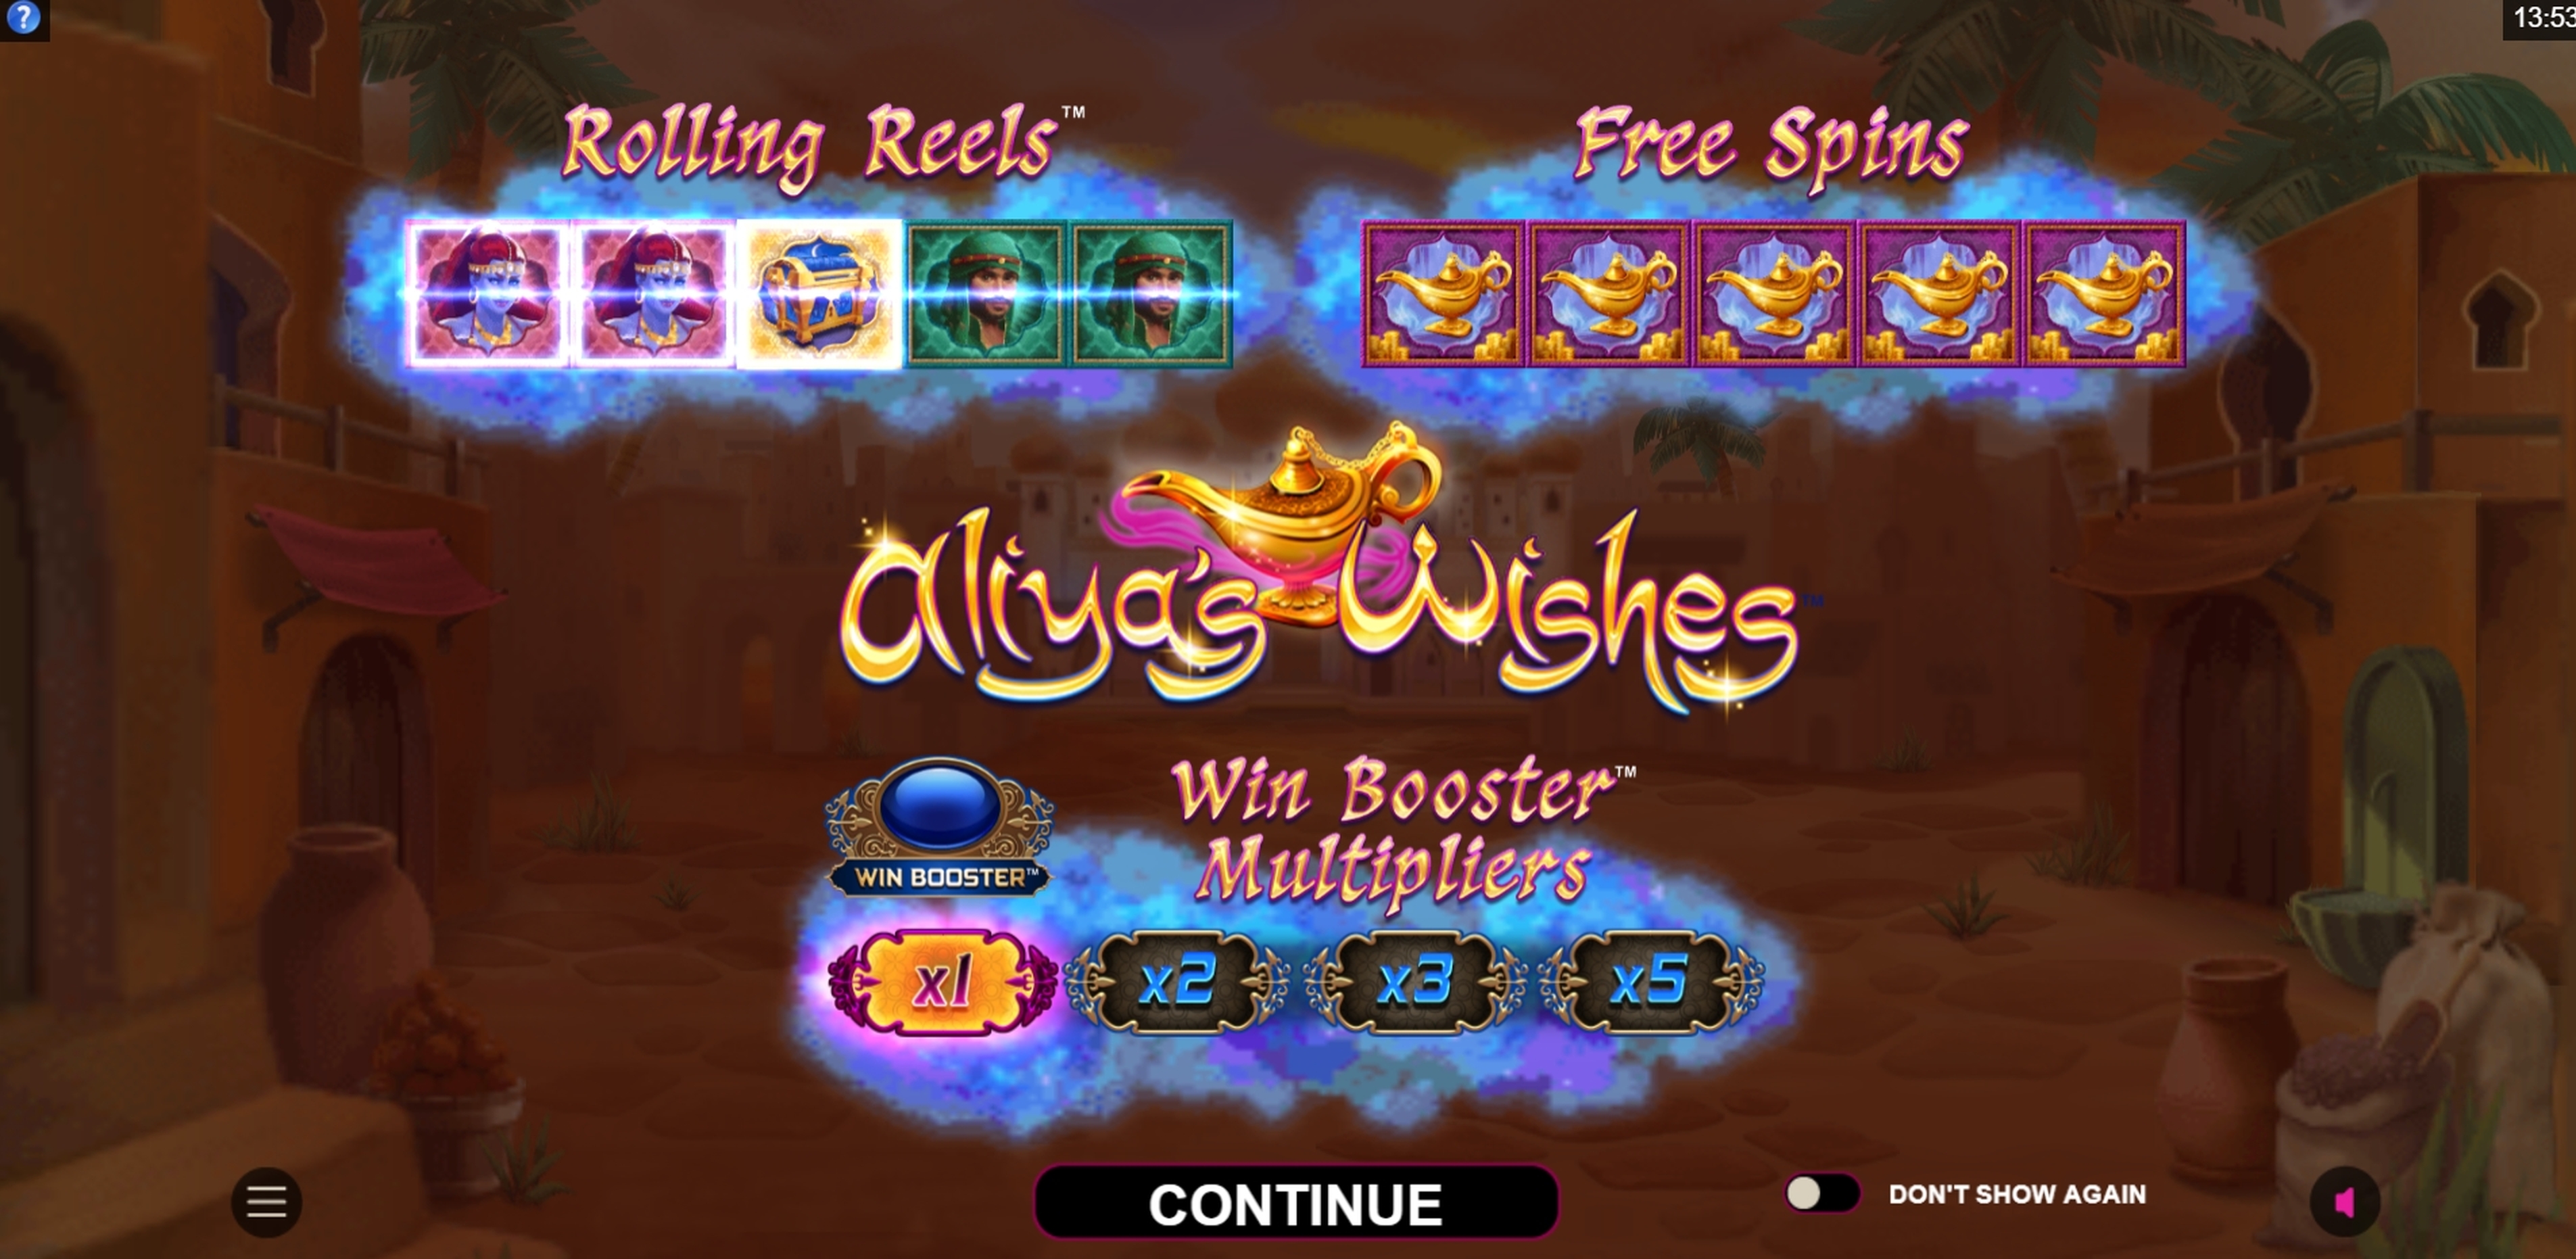 Play Aliyas Wishes Free Casino Slot Game by Fortune Factory Studios